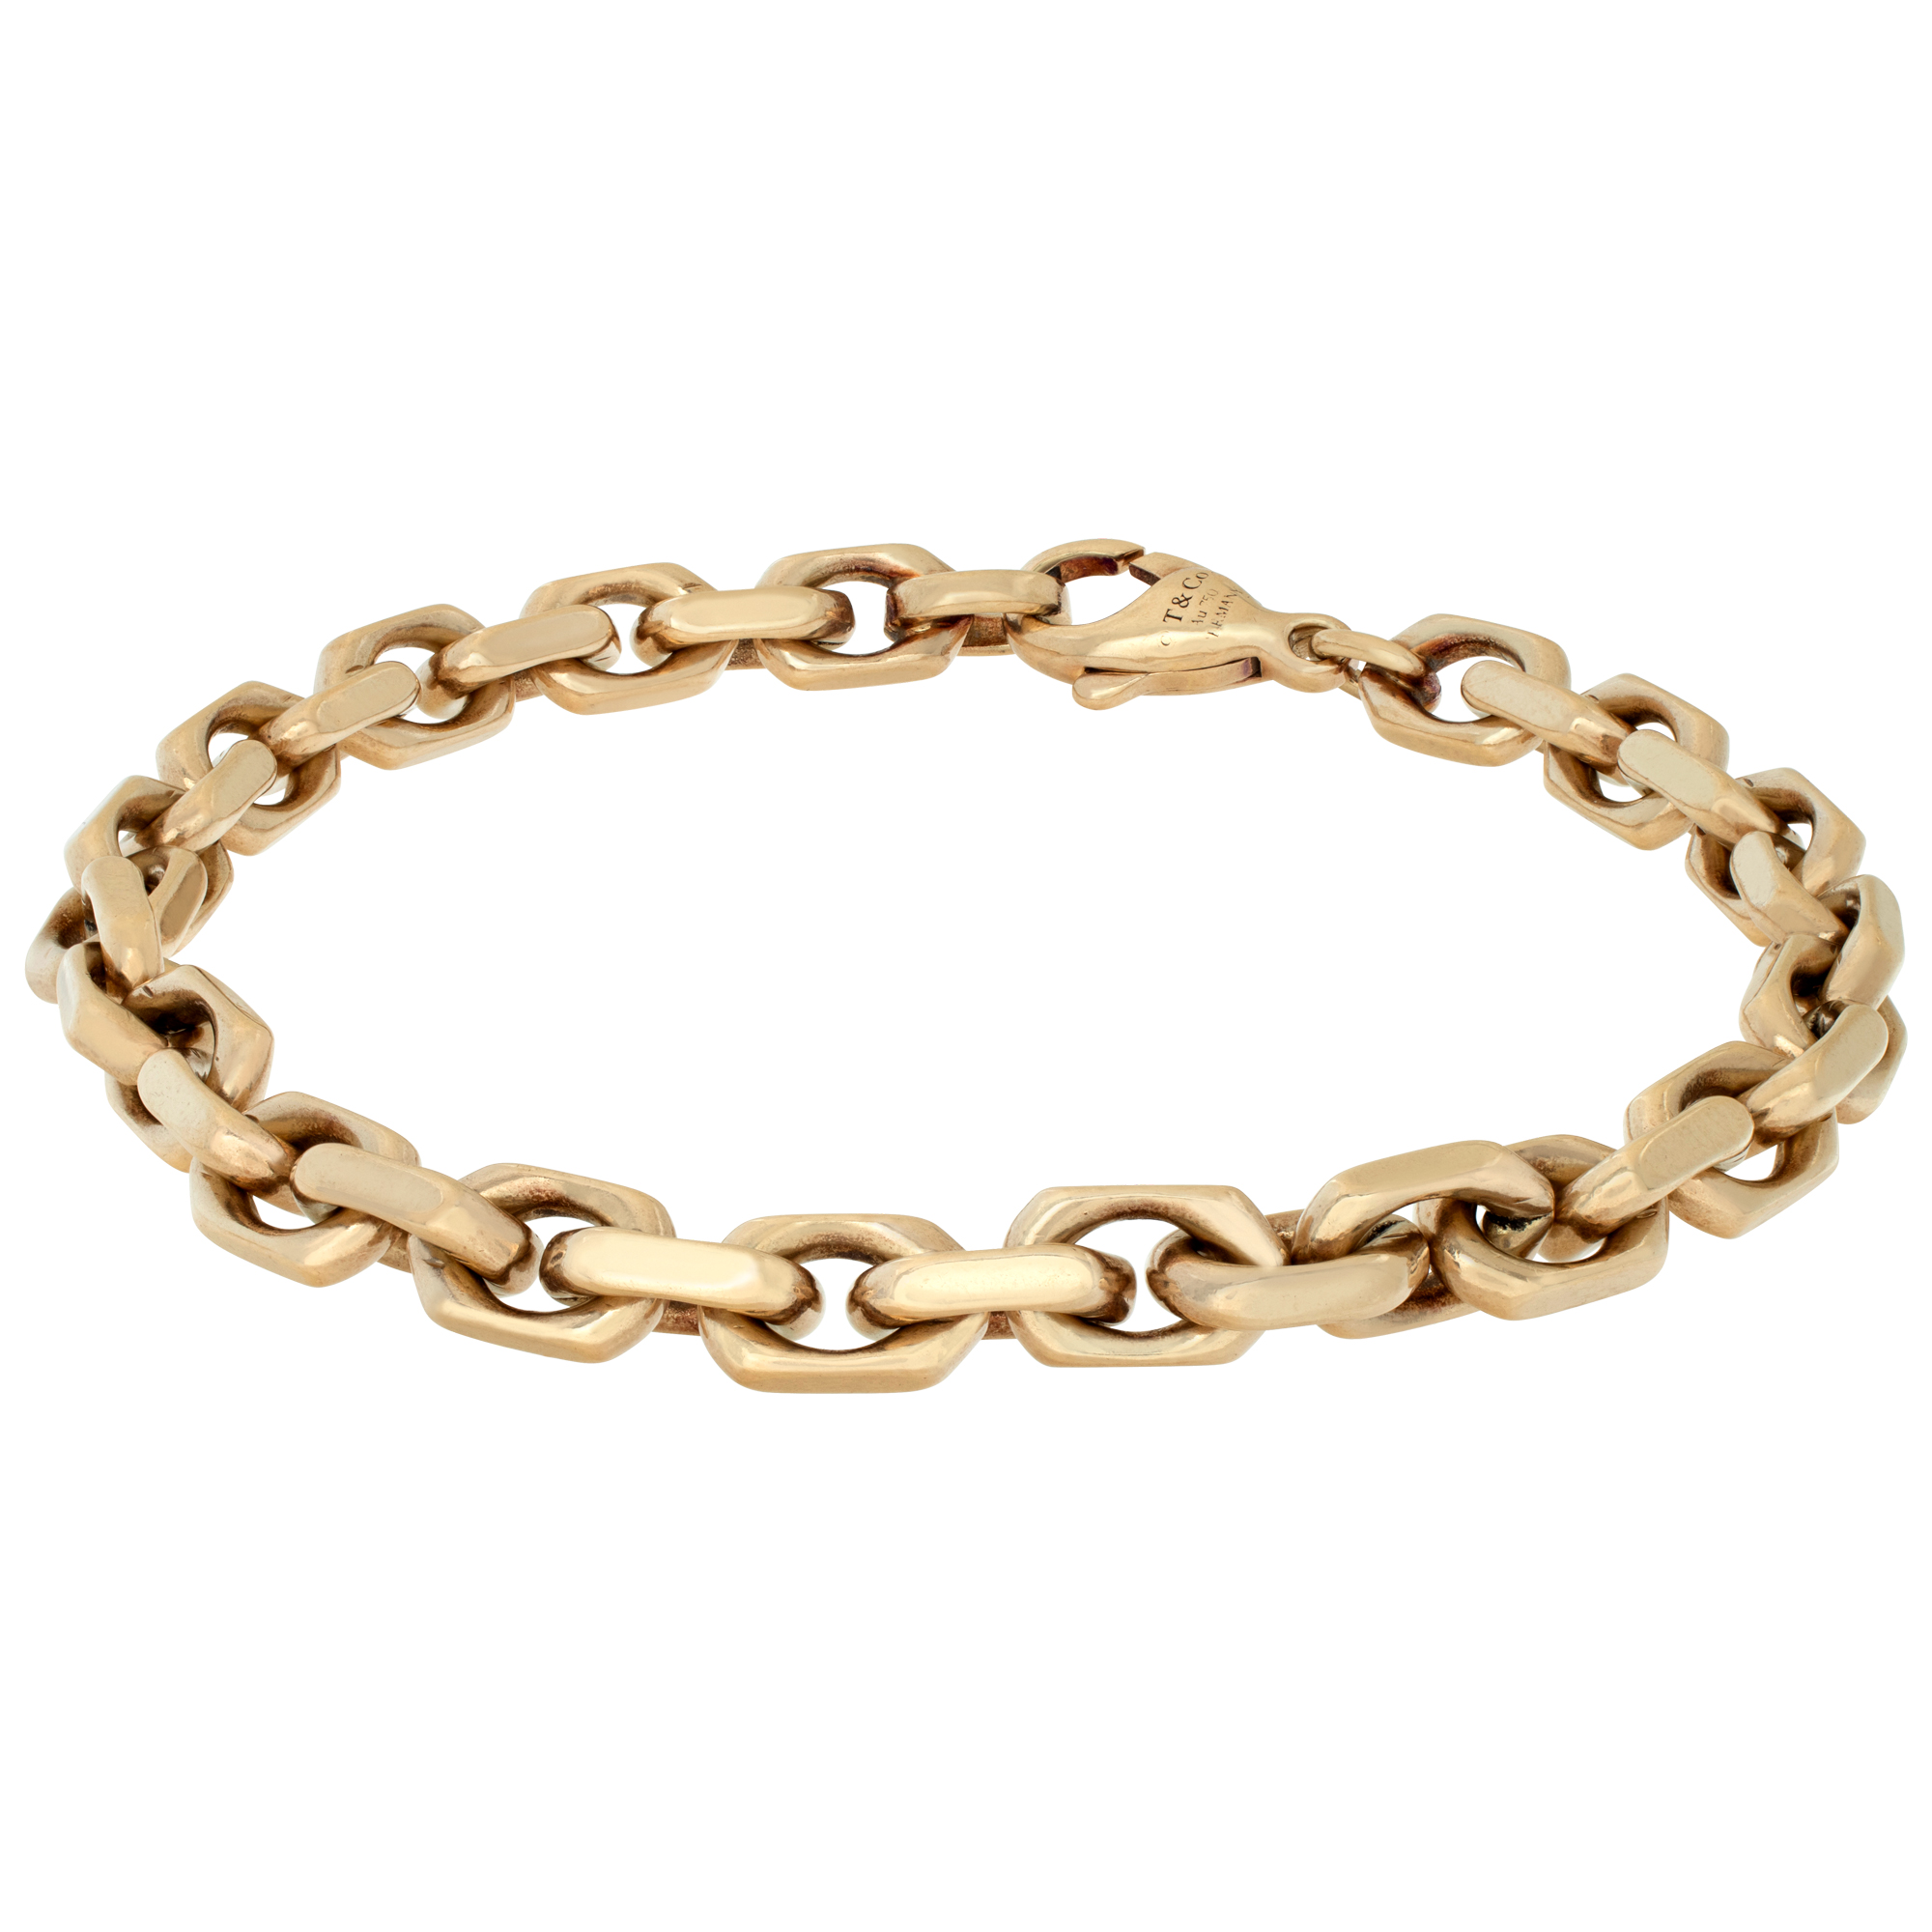 Tiffany and Co. link bracelet in 18k yellow gold. Measures 8.25 inches. image 1